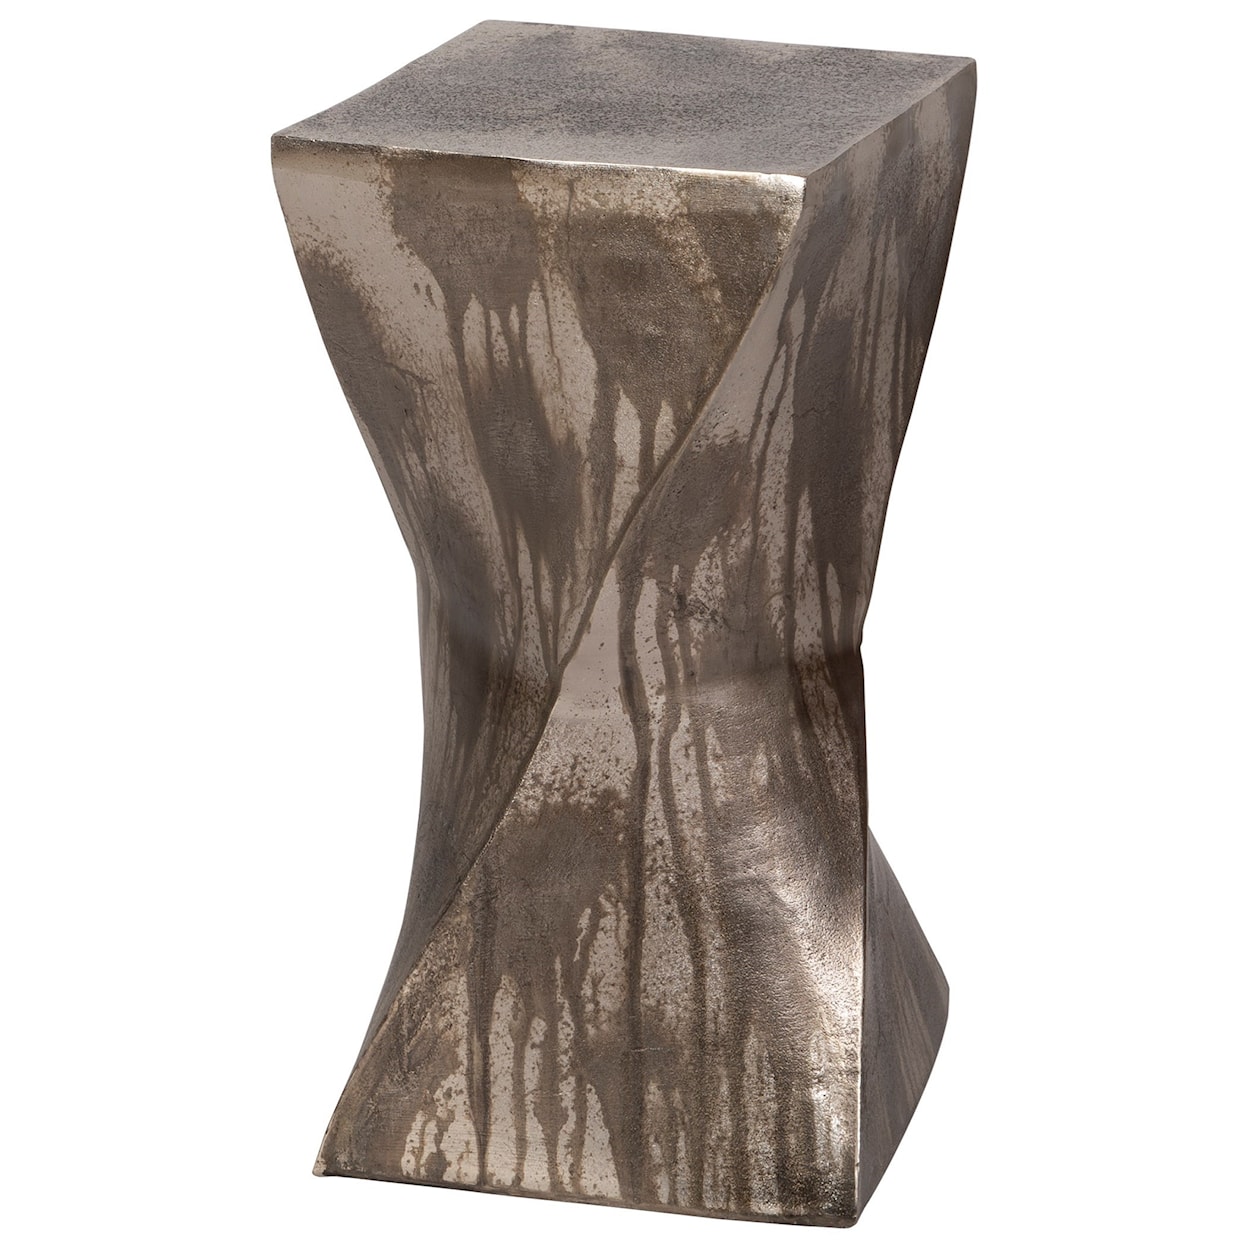 Uttermost Accent Furniture - Occasional Tables Euphrates Accent Table